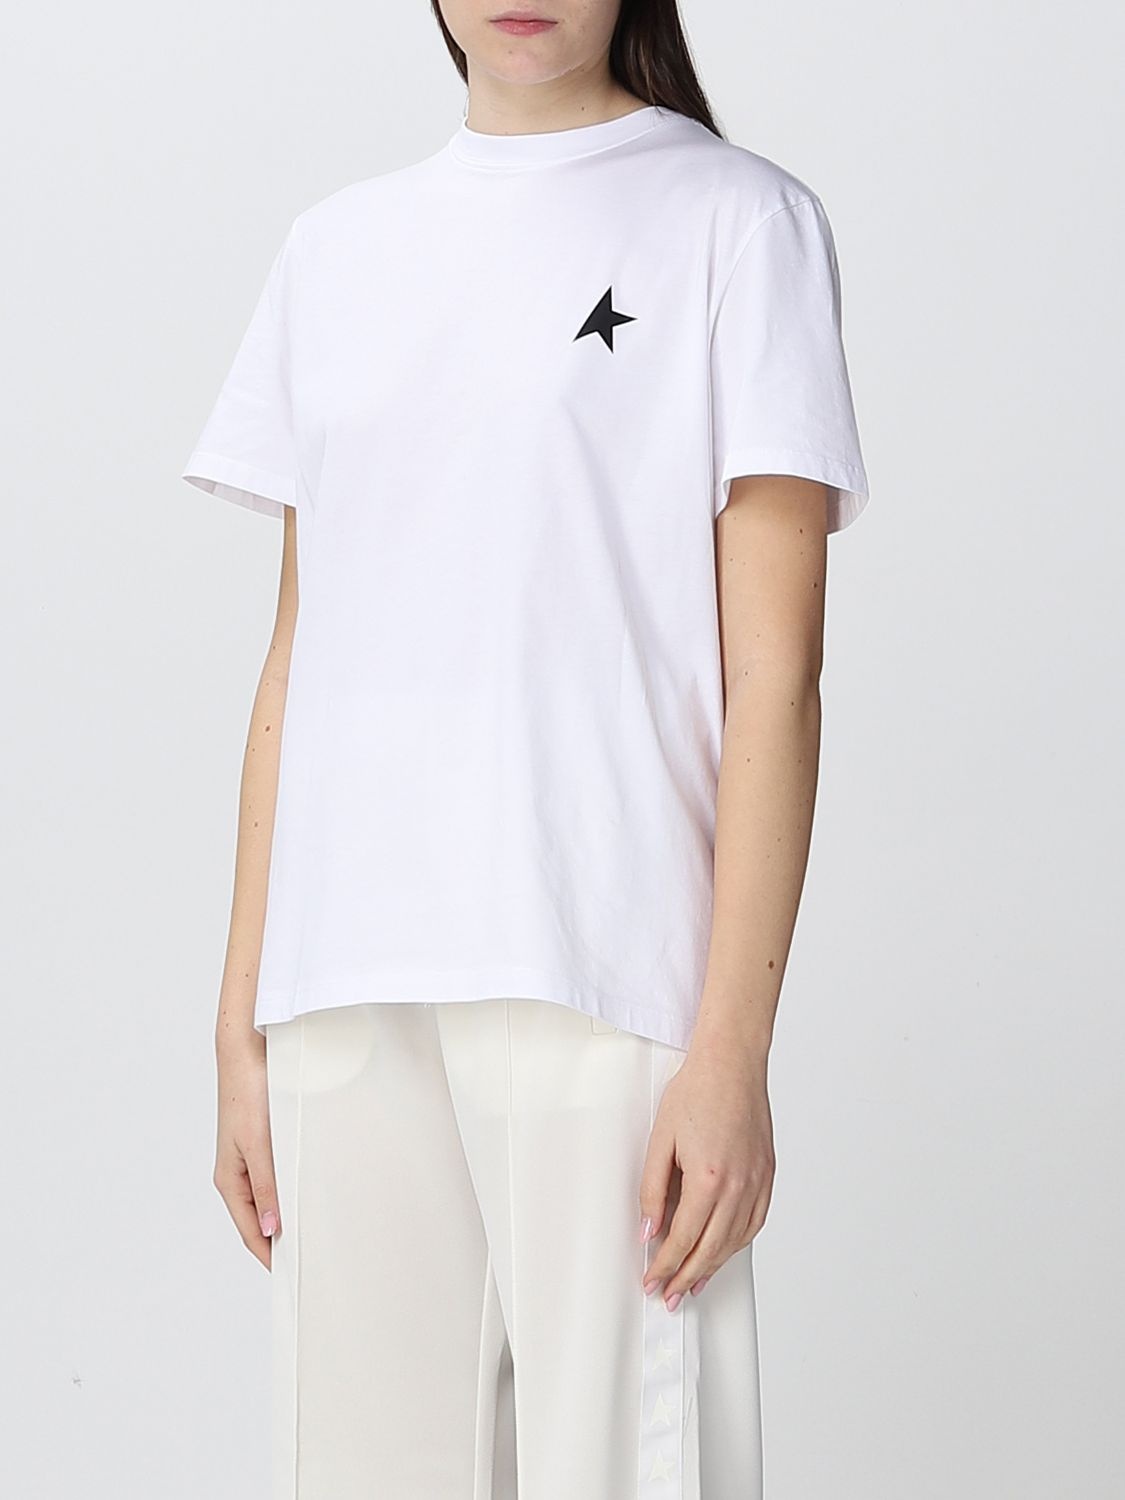 Golden Goose T-shirt in jersey with Star logo - 4